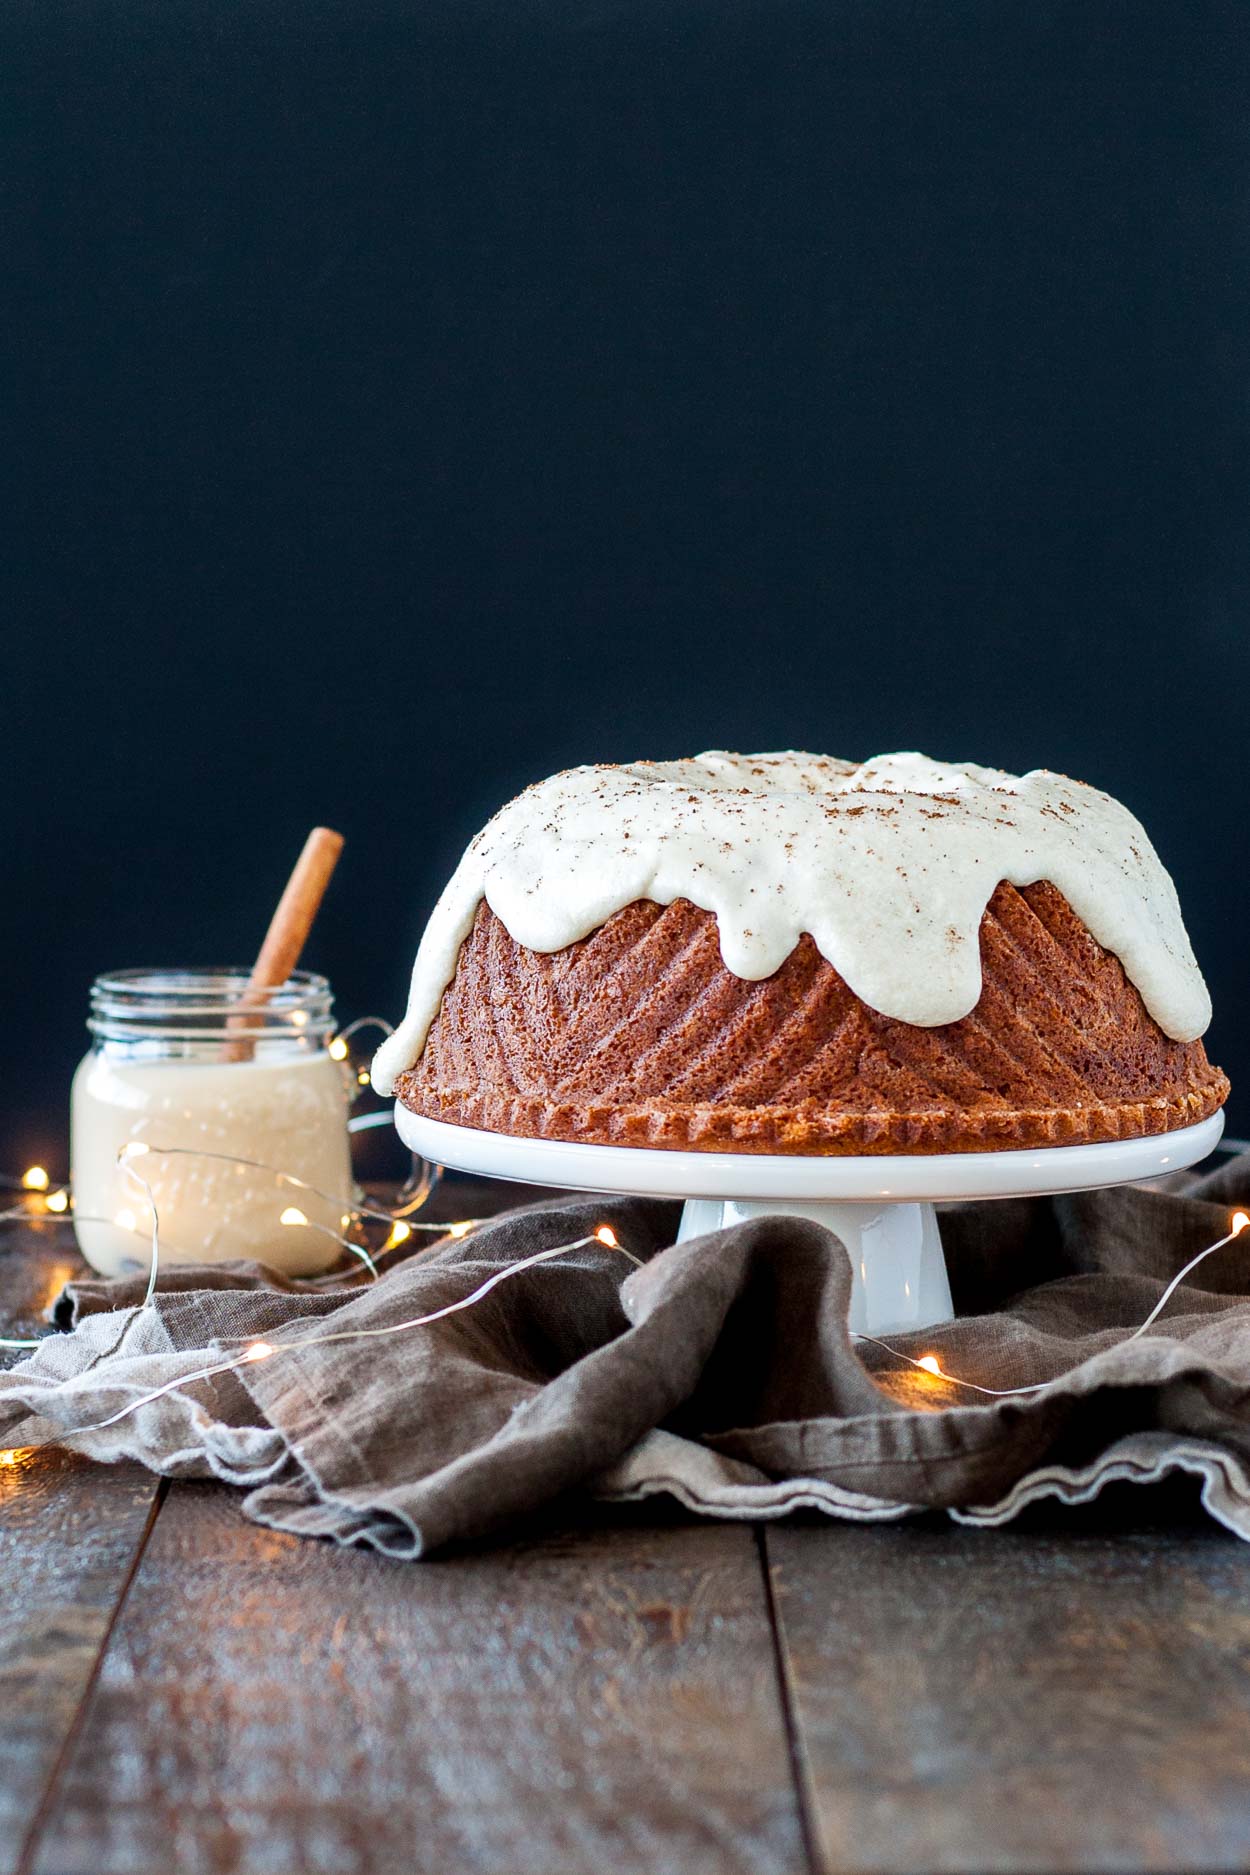 A bundt cake on a white cake stand sitting on top of a wooden table.